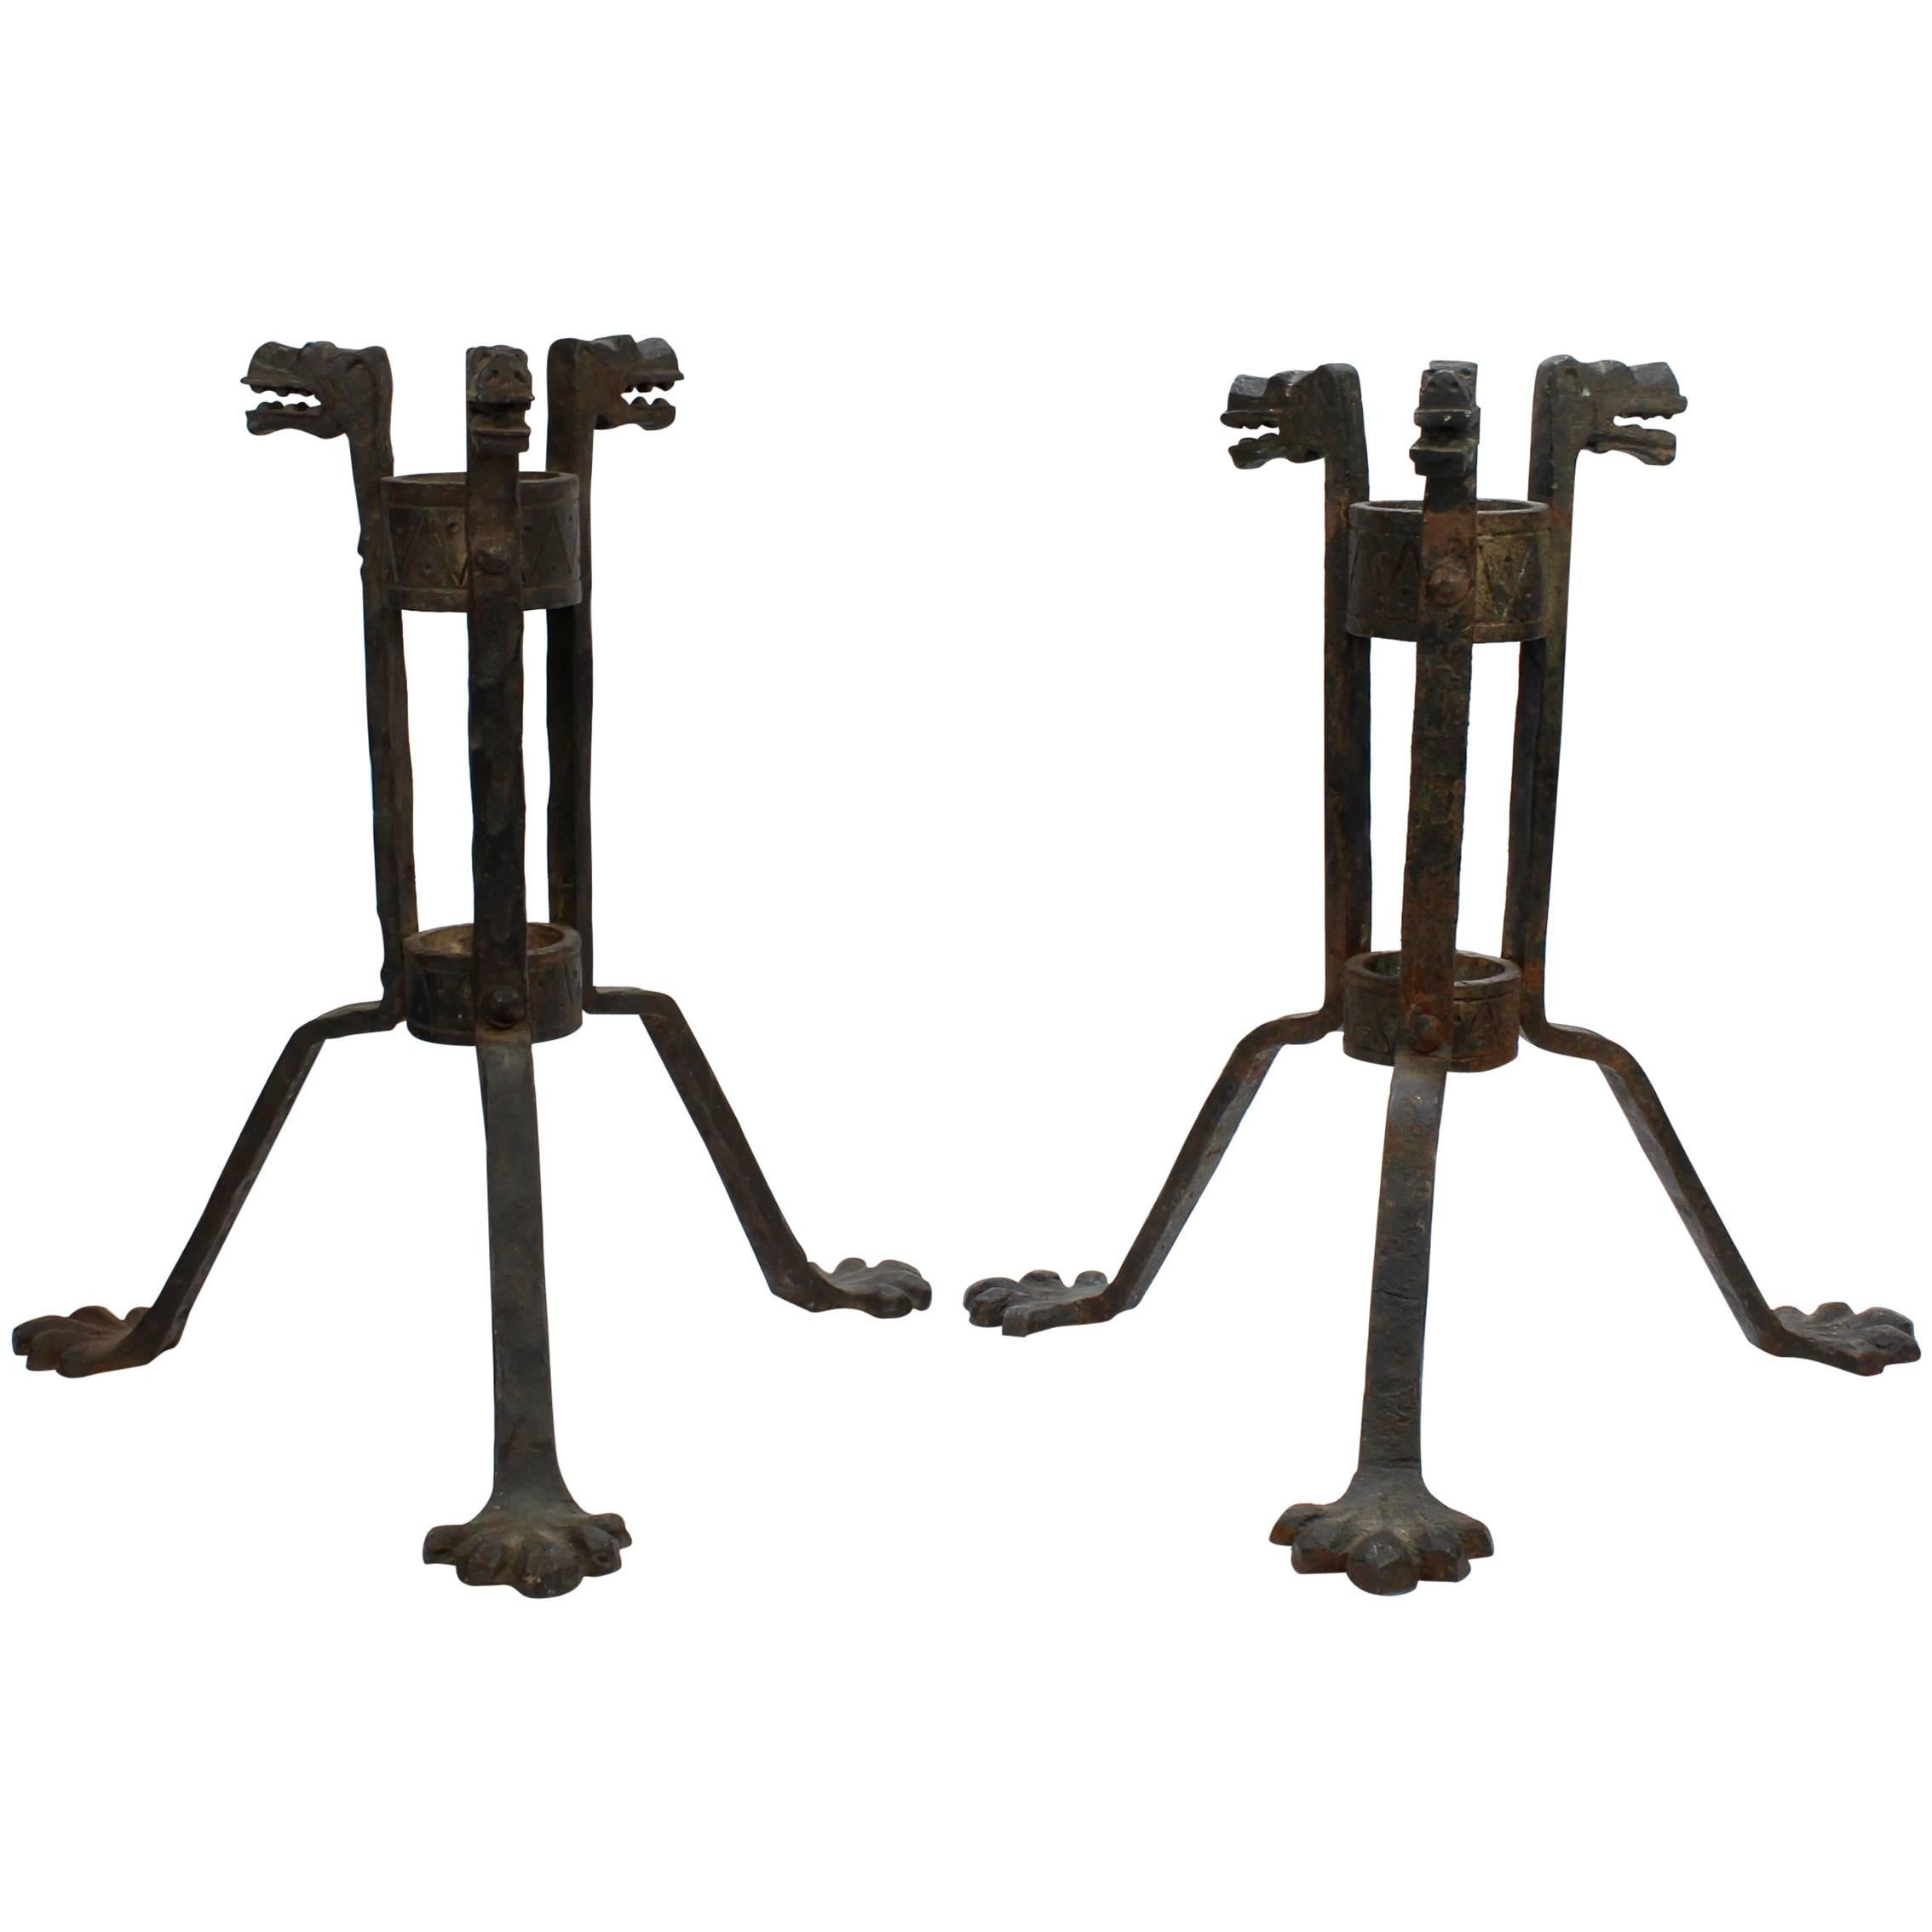 Pair of Gothic Revival Samuel Yellin Style Figural Wrought Iron Planter Stands